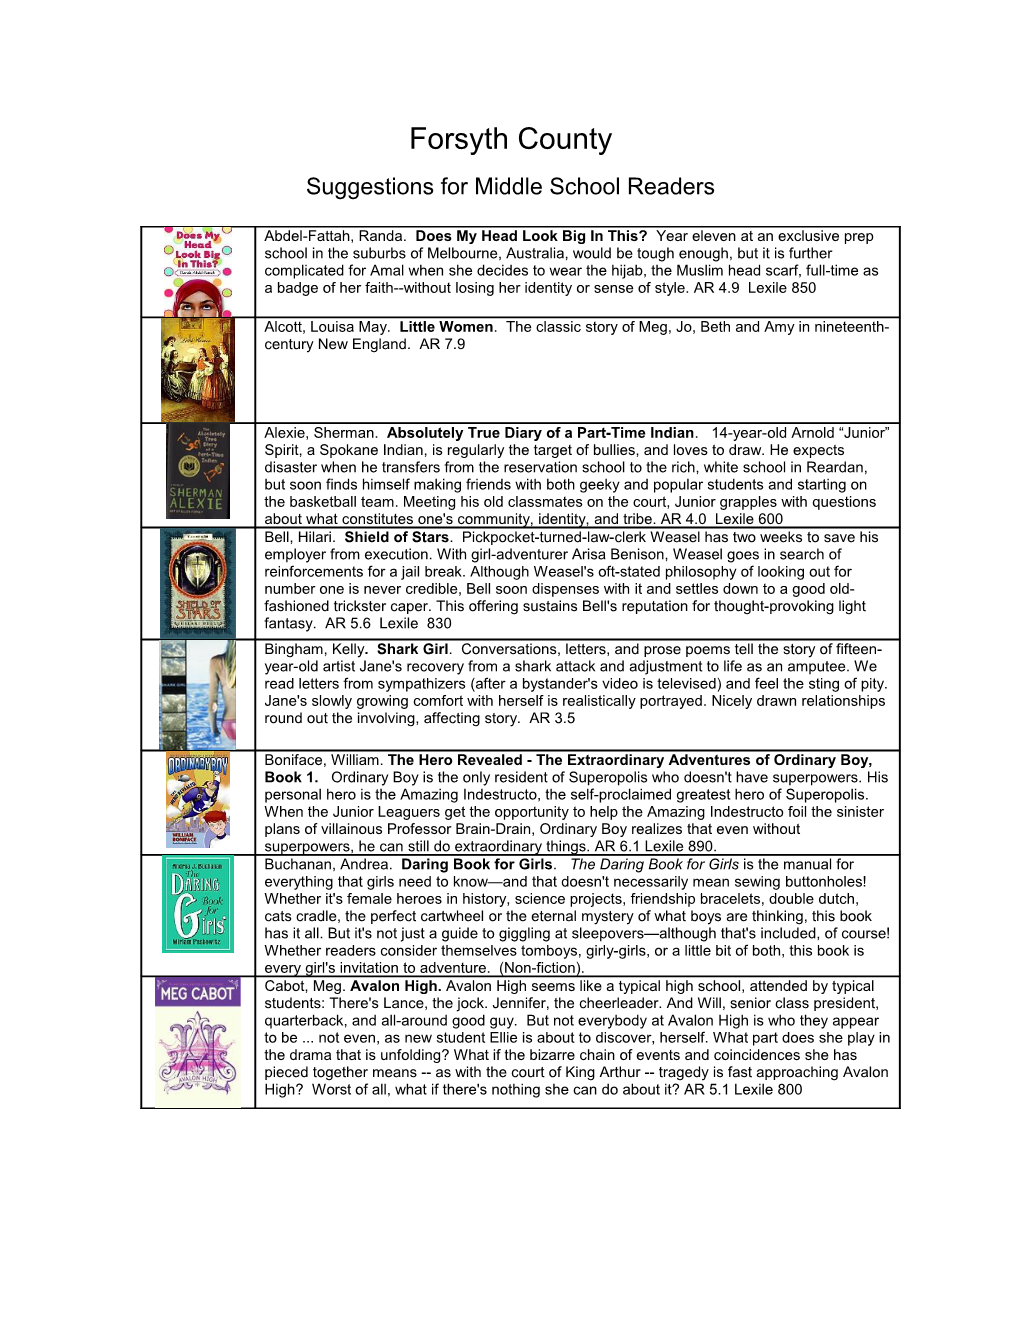 Suggestions for Middle School Readers